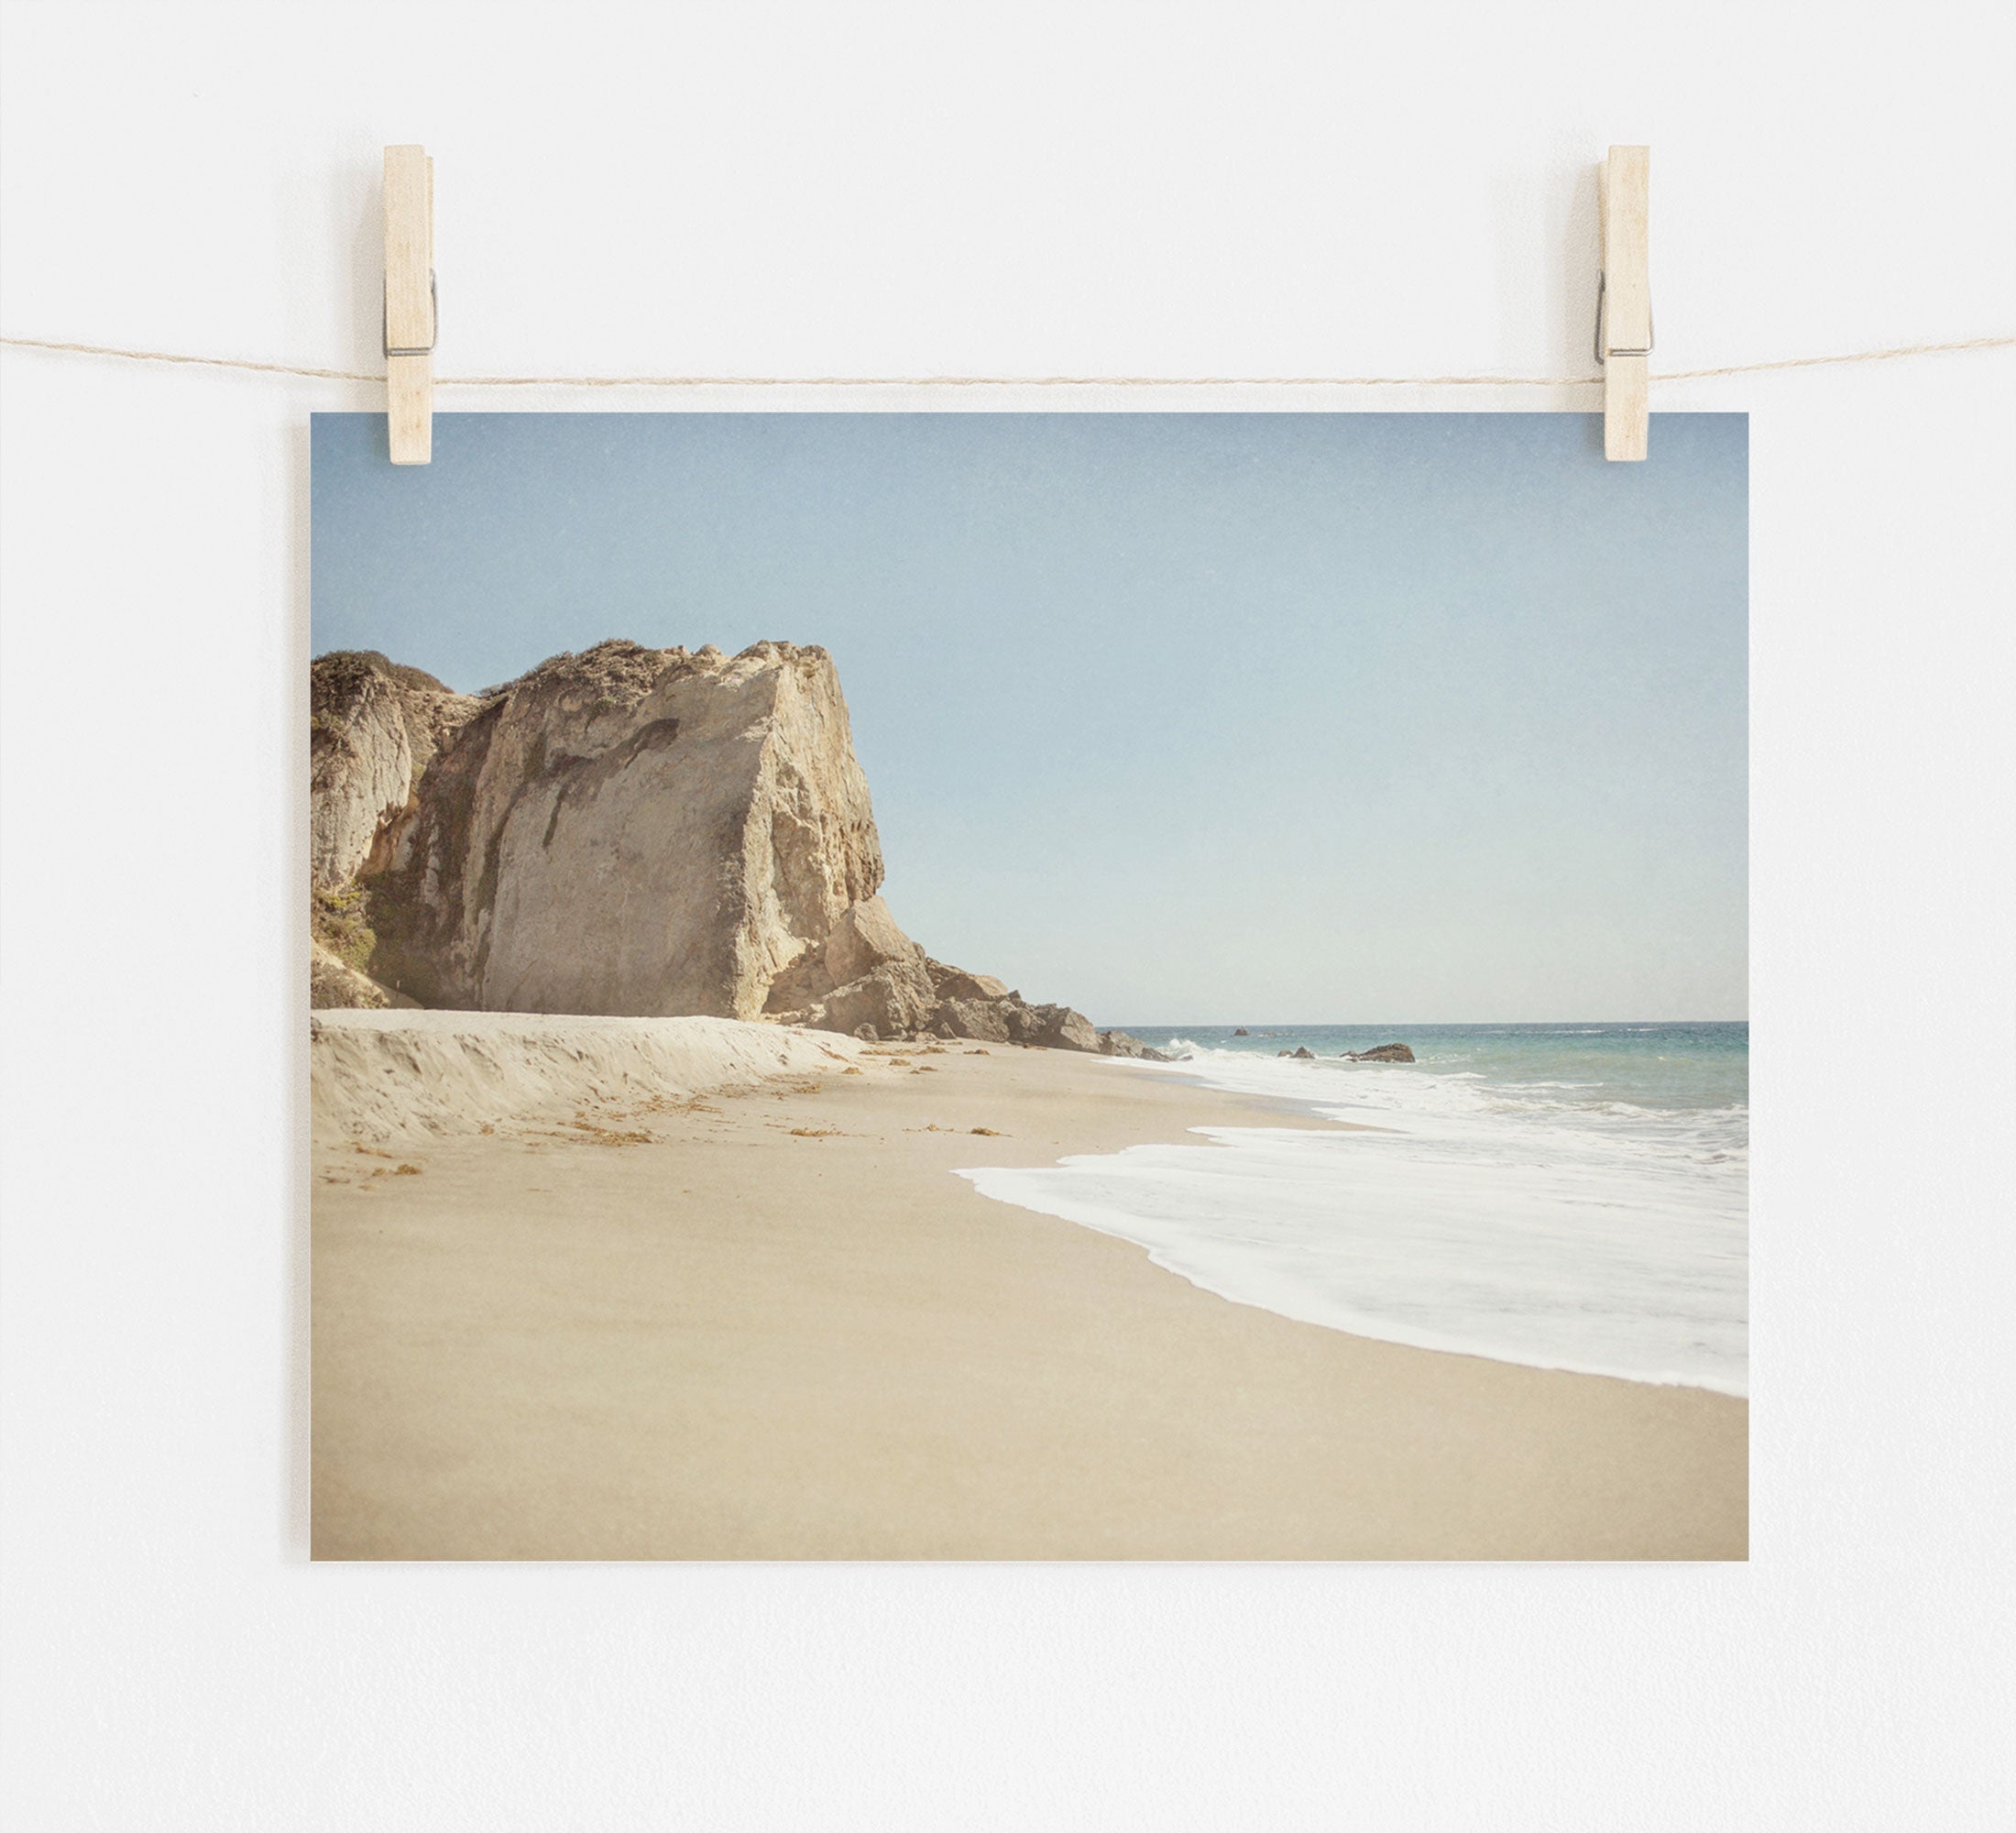 A photo of Offley Green's California Malibu Print, 'Point Dume' with waves gently lapping the shore and a large rocky outcrop to the left. The picture is pinned to a wall by wooden clothespins.